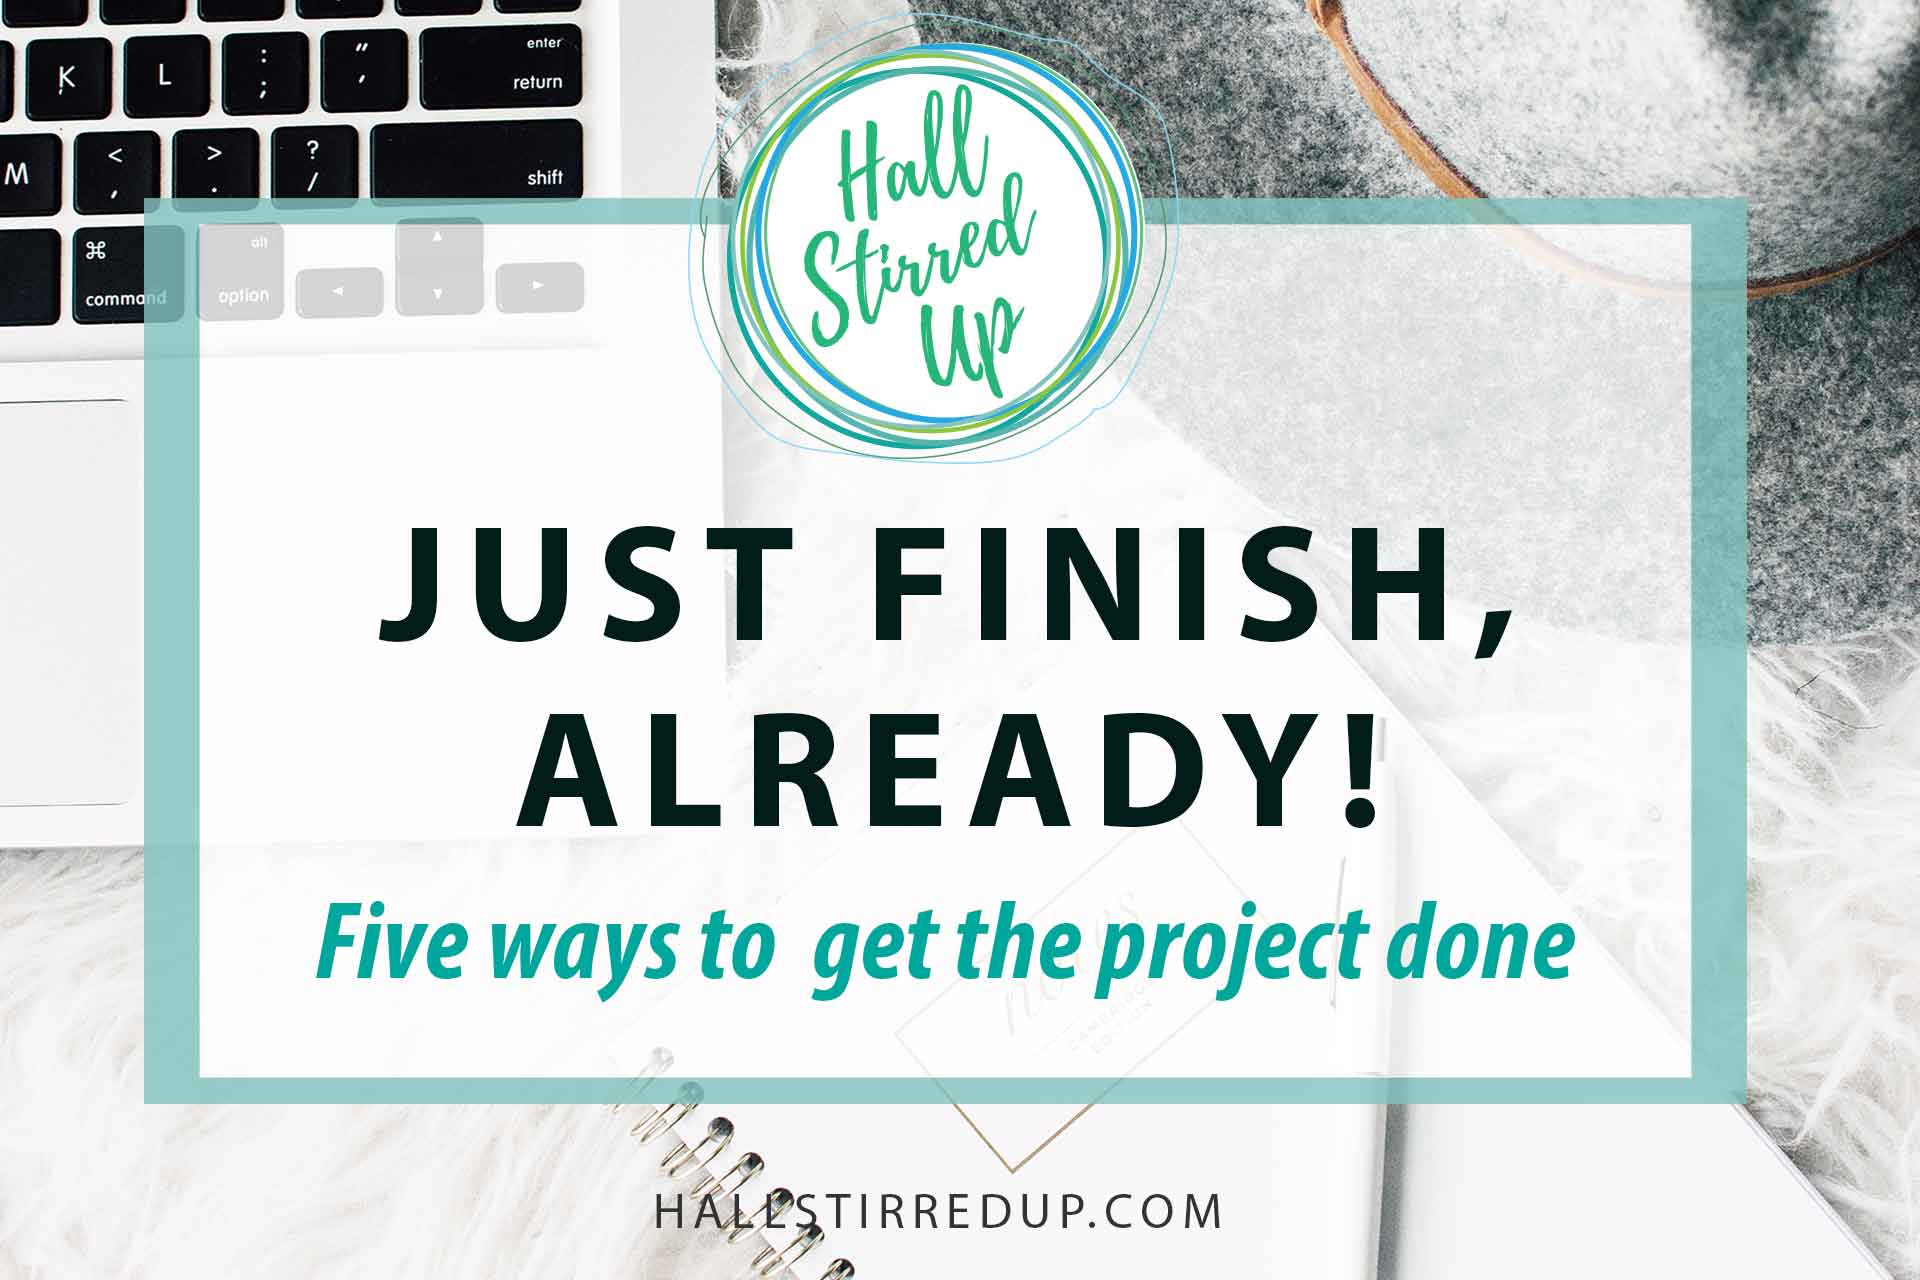 Just Finish, Already! Five Ways to Get Your Project Done